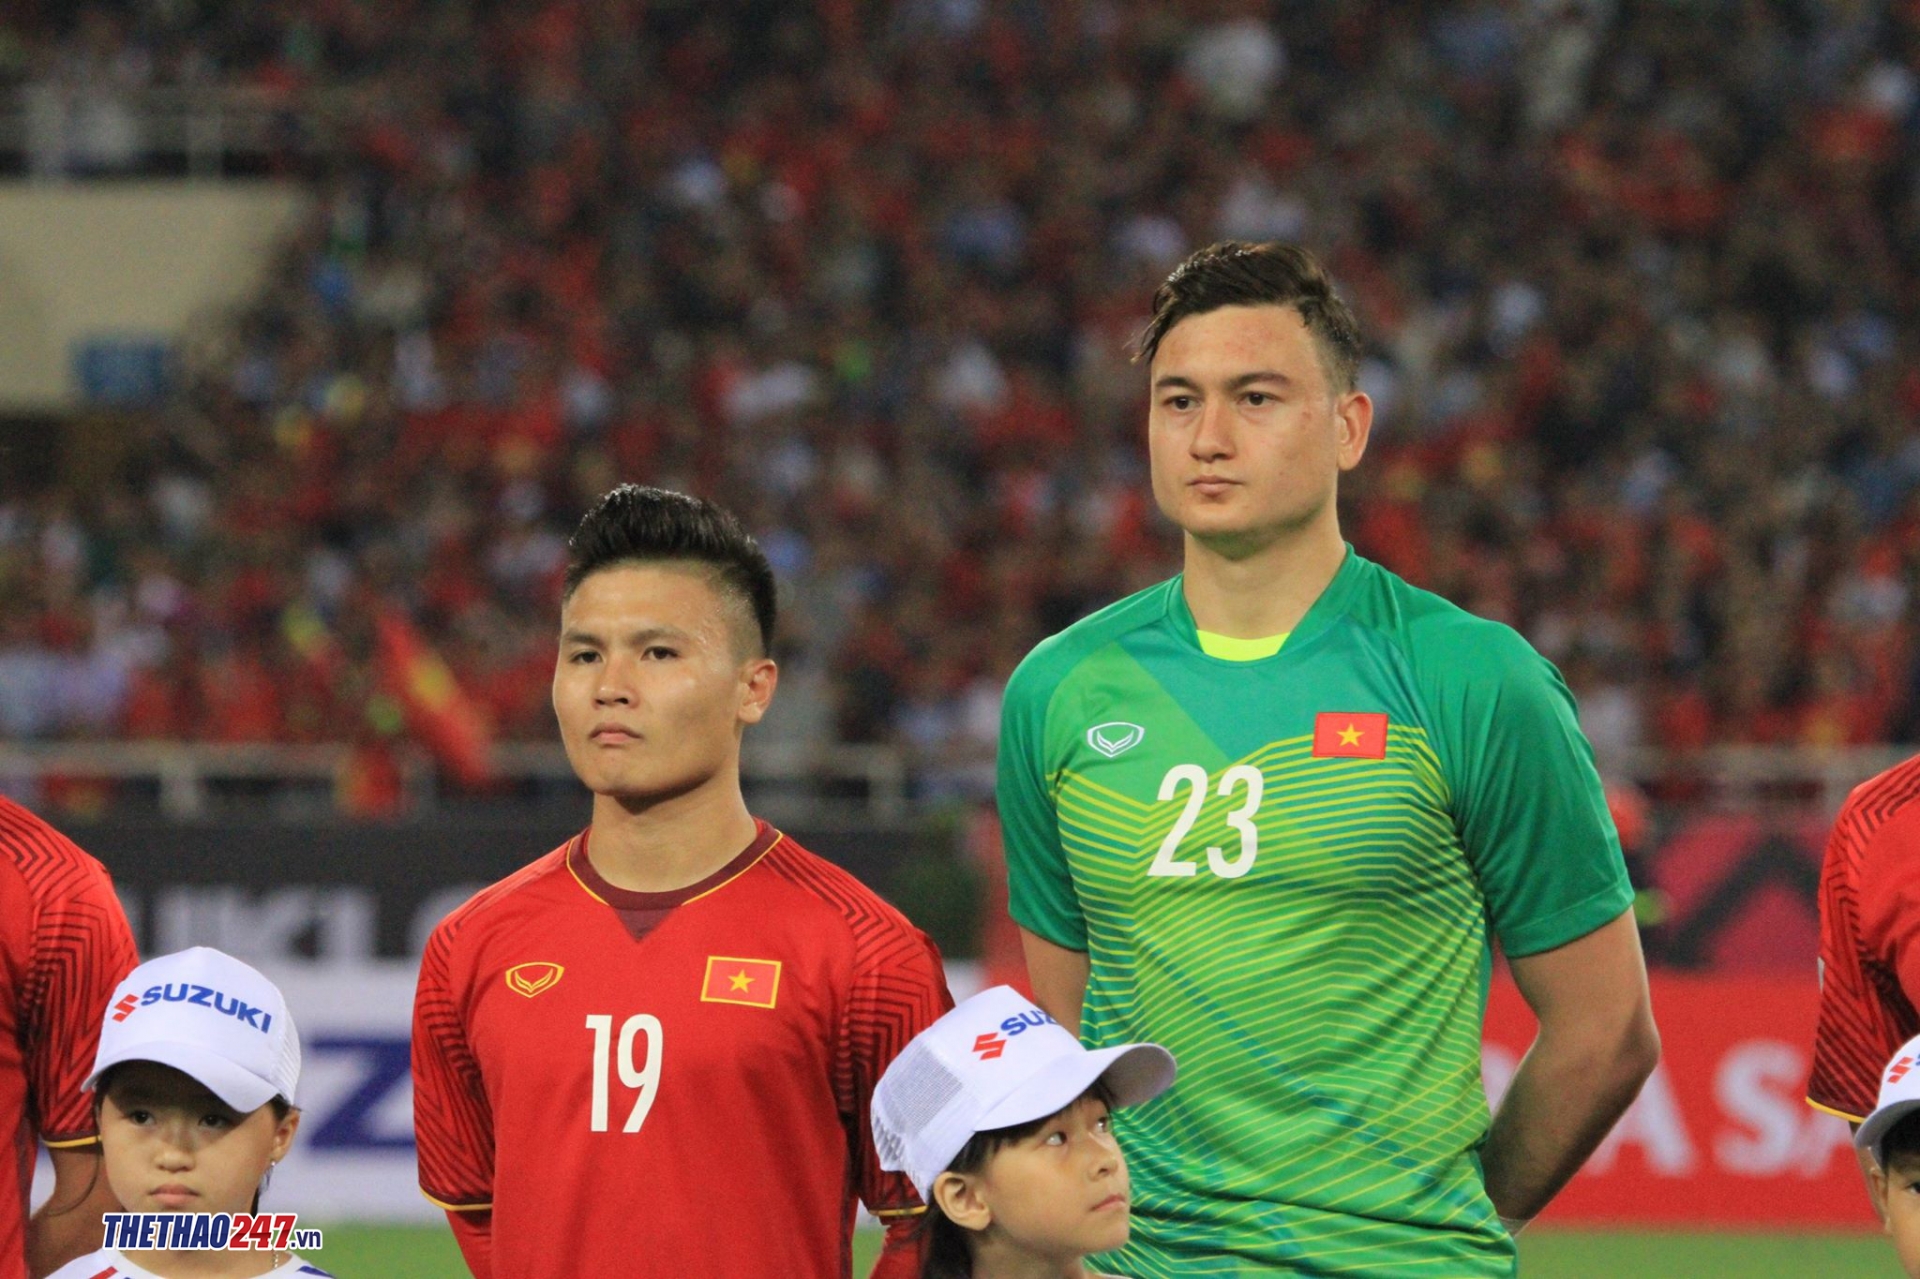 Wearing the national shirt, becoming the No. 1 goalkeeper in Vietnam is the greatest achievement of Dang Van Lam.